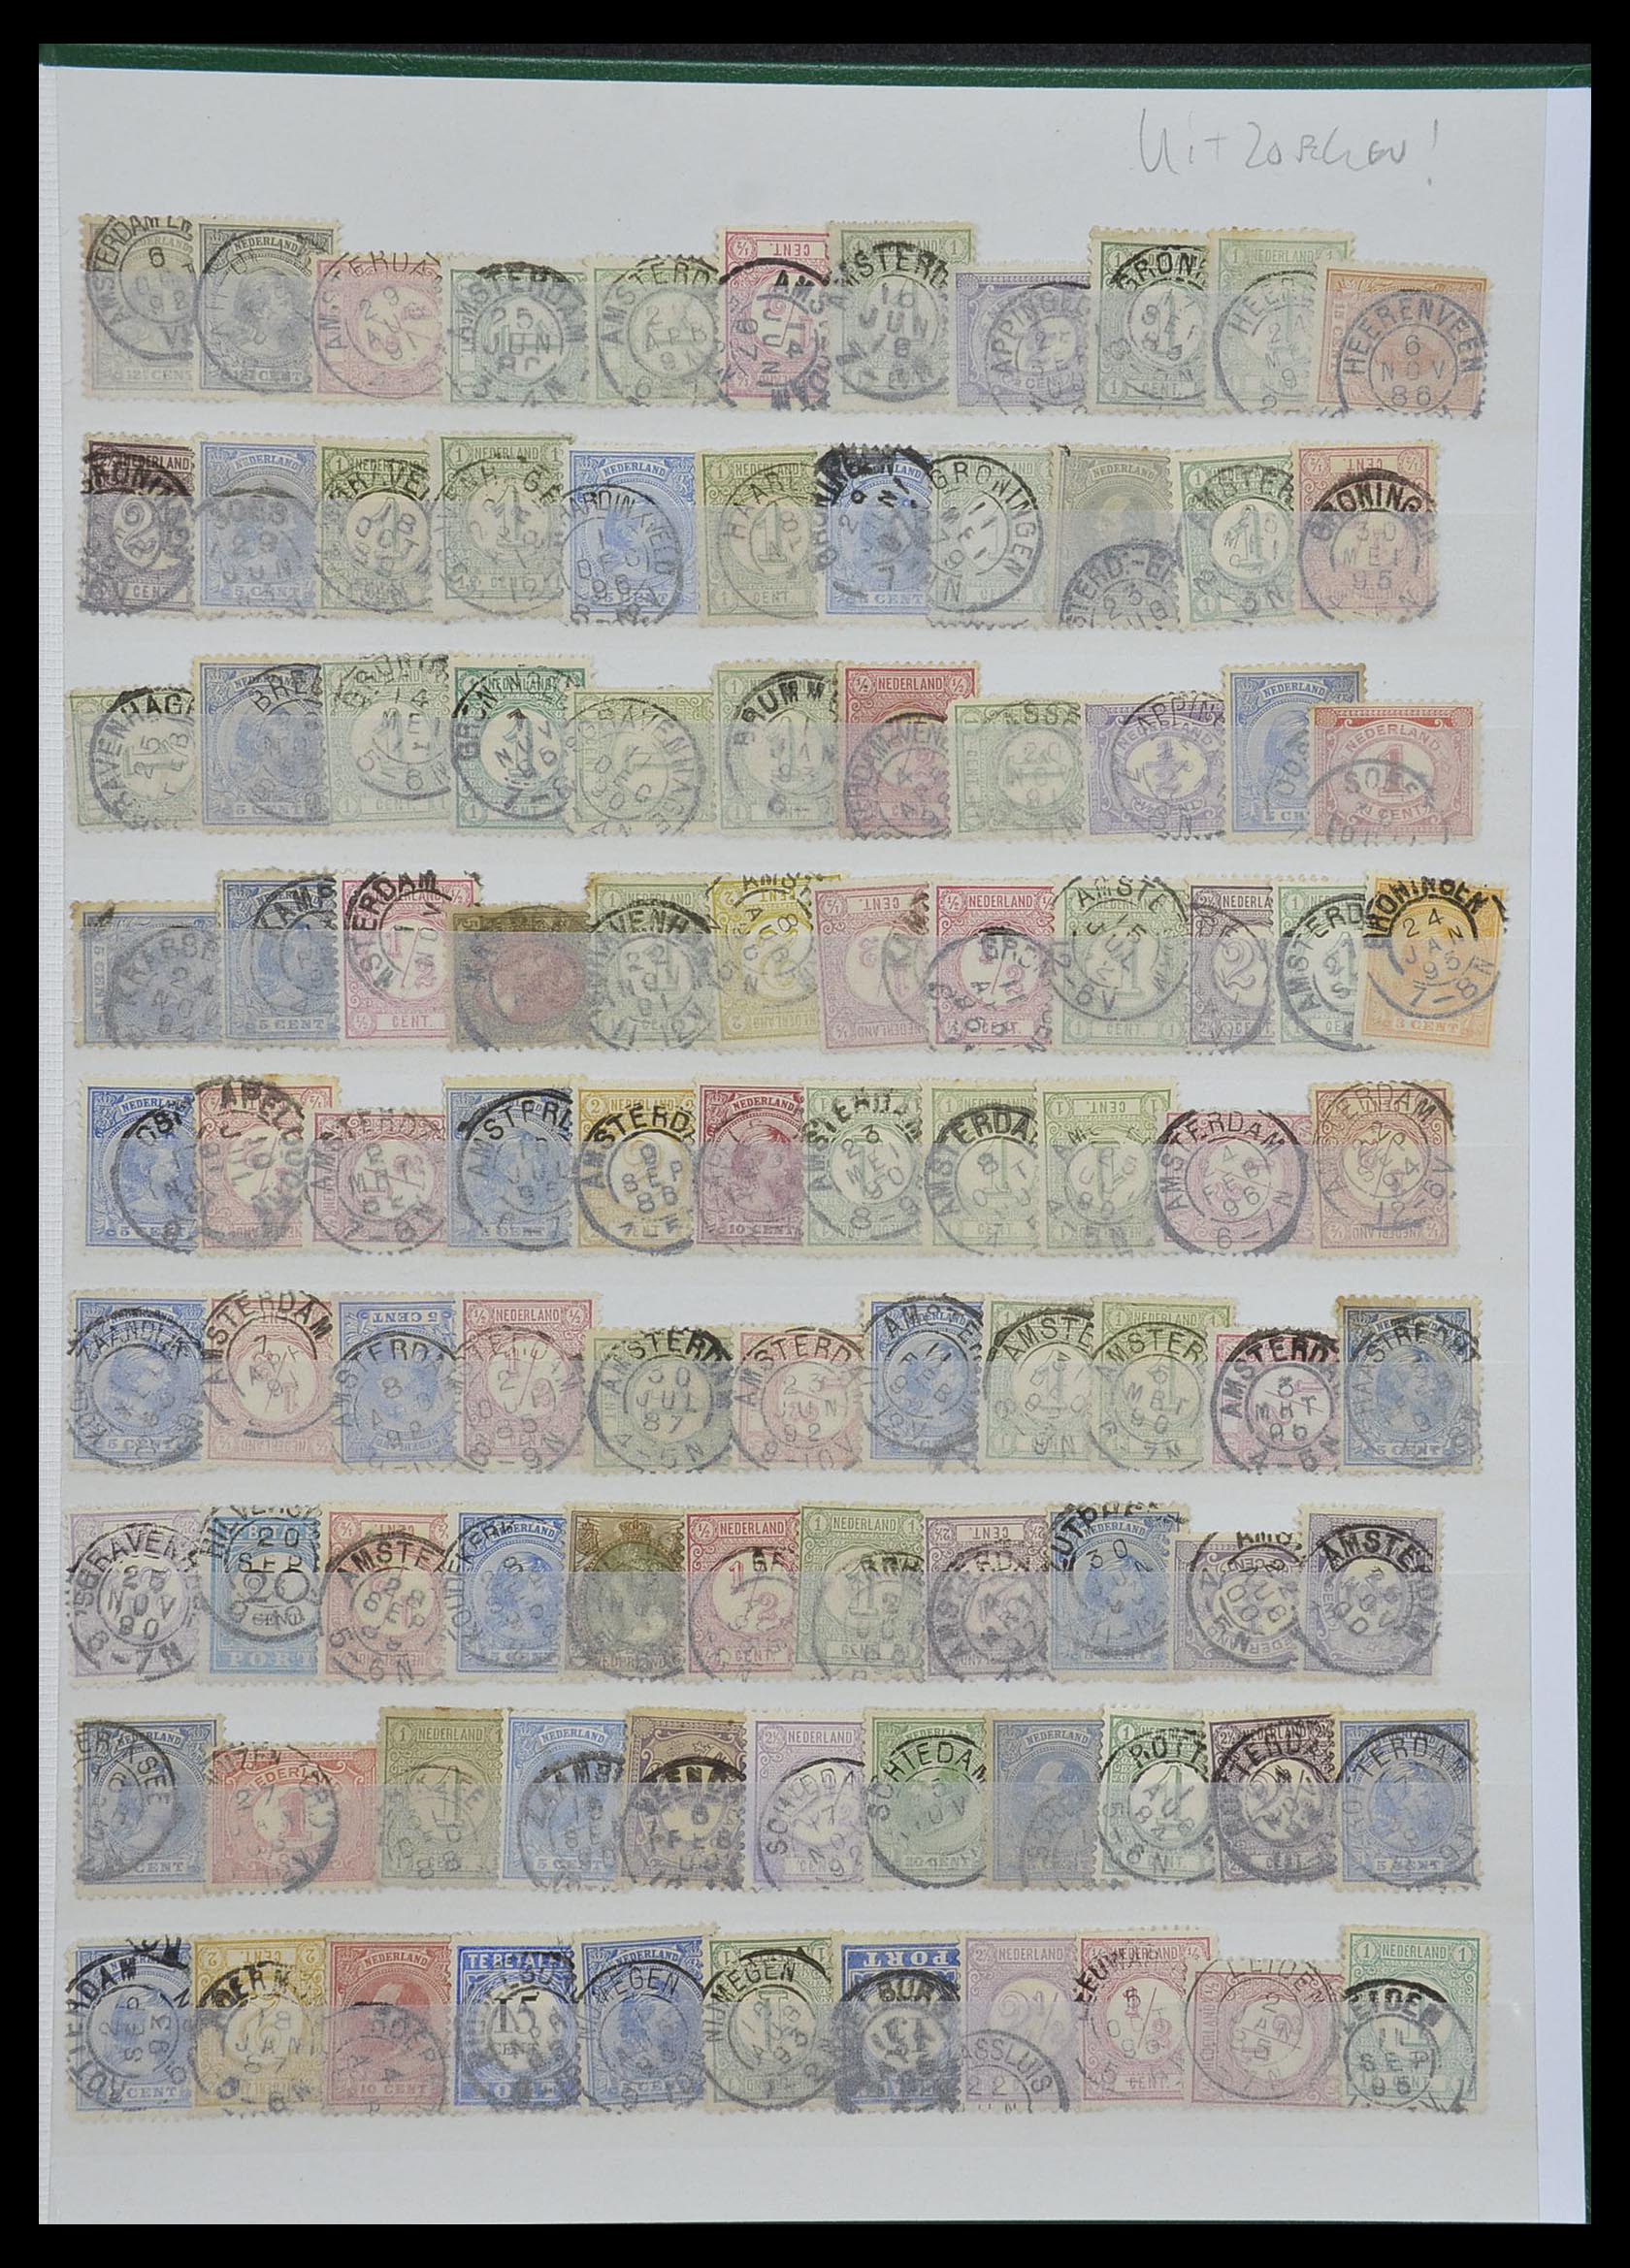 33992 011 - Stamp collection 33992 Netherlands smallround cancels.